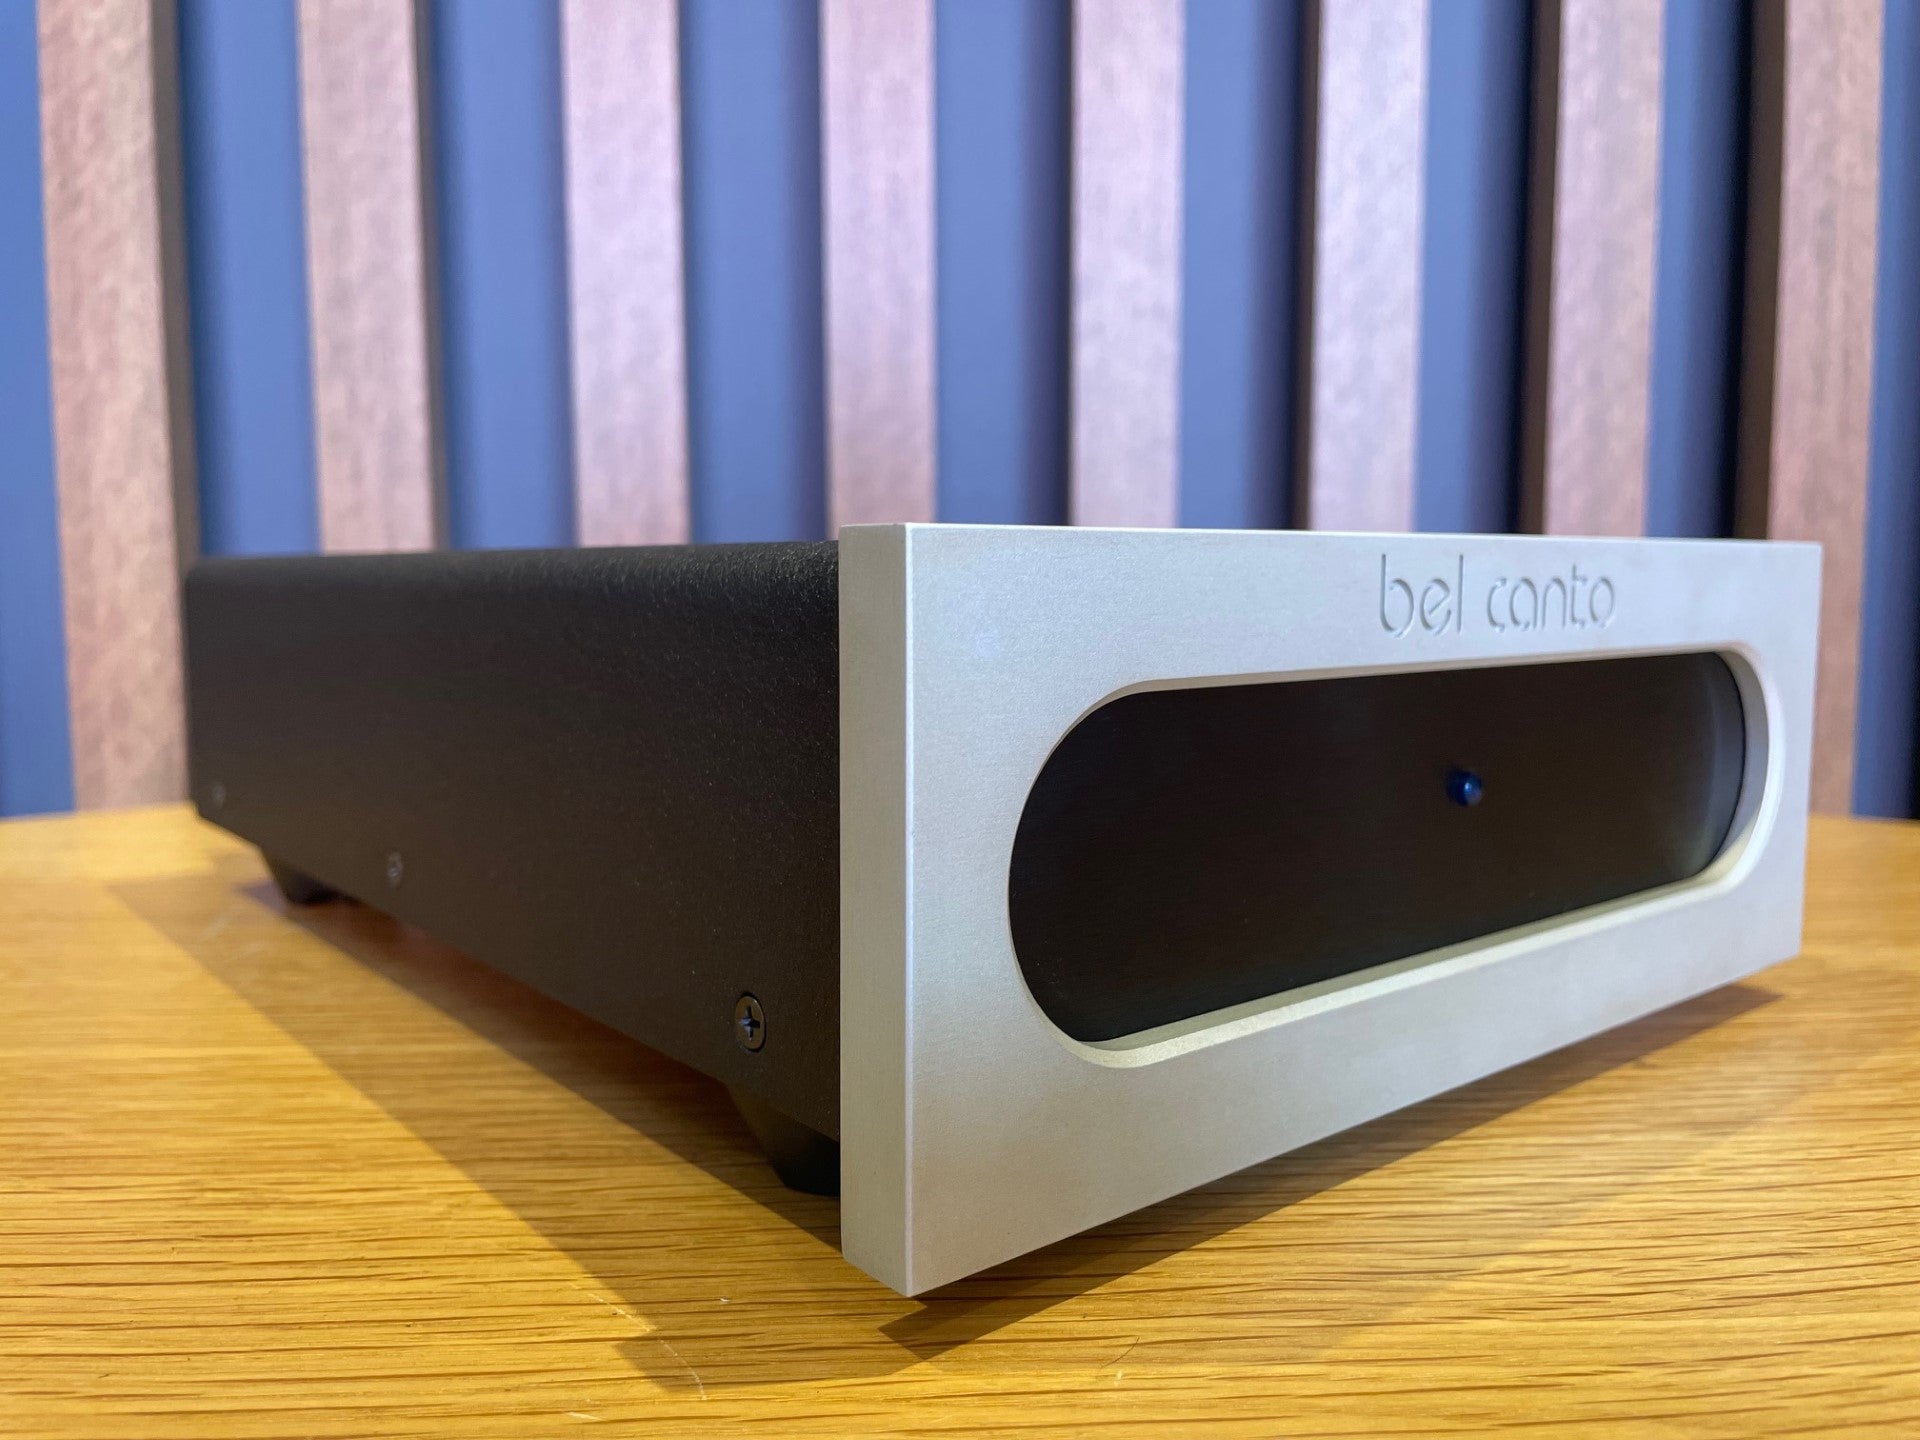 Bel Canto e.One REF500S Power Amplifier - Consignment